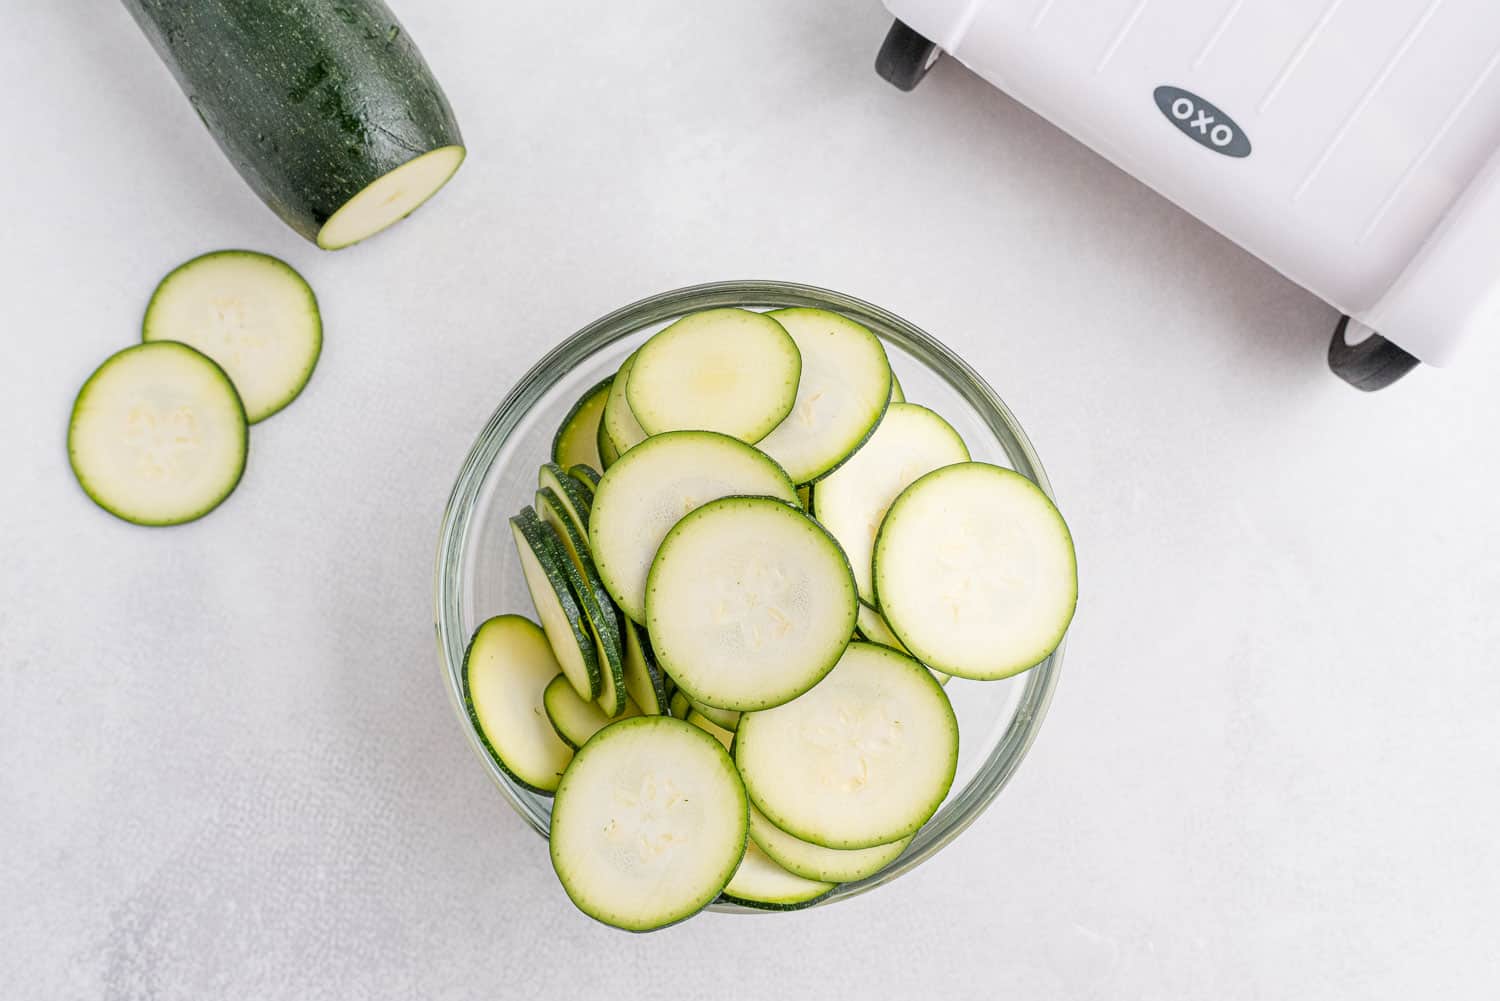 Sliced zucchini in a bowl, a whole zucchini partially visible, a mandoline in the upper right hand corner.